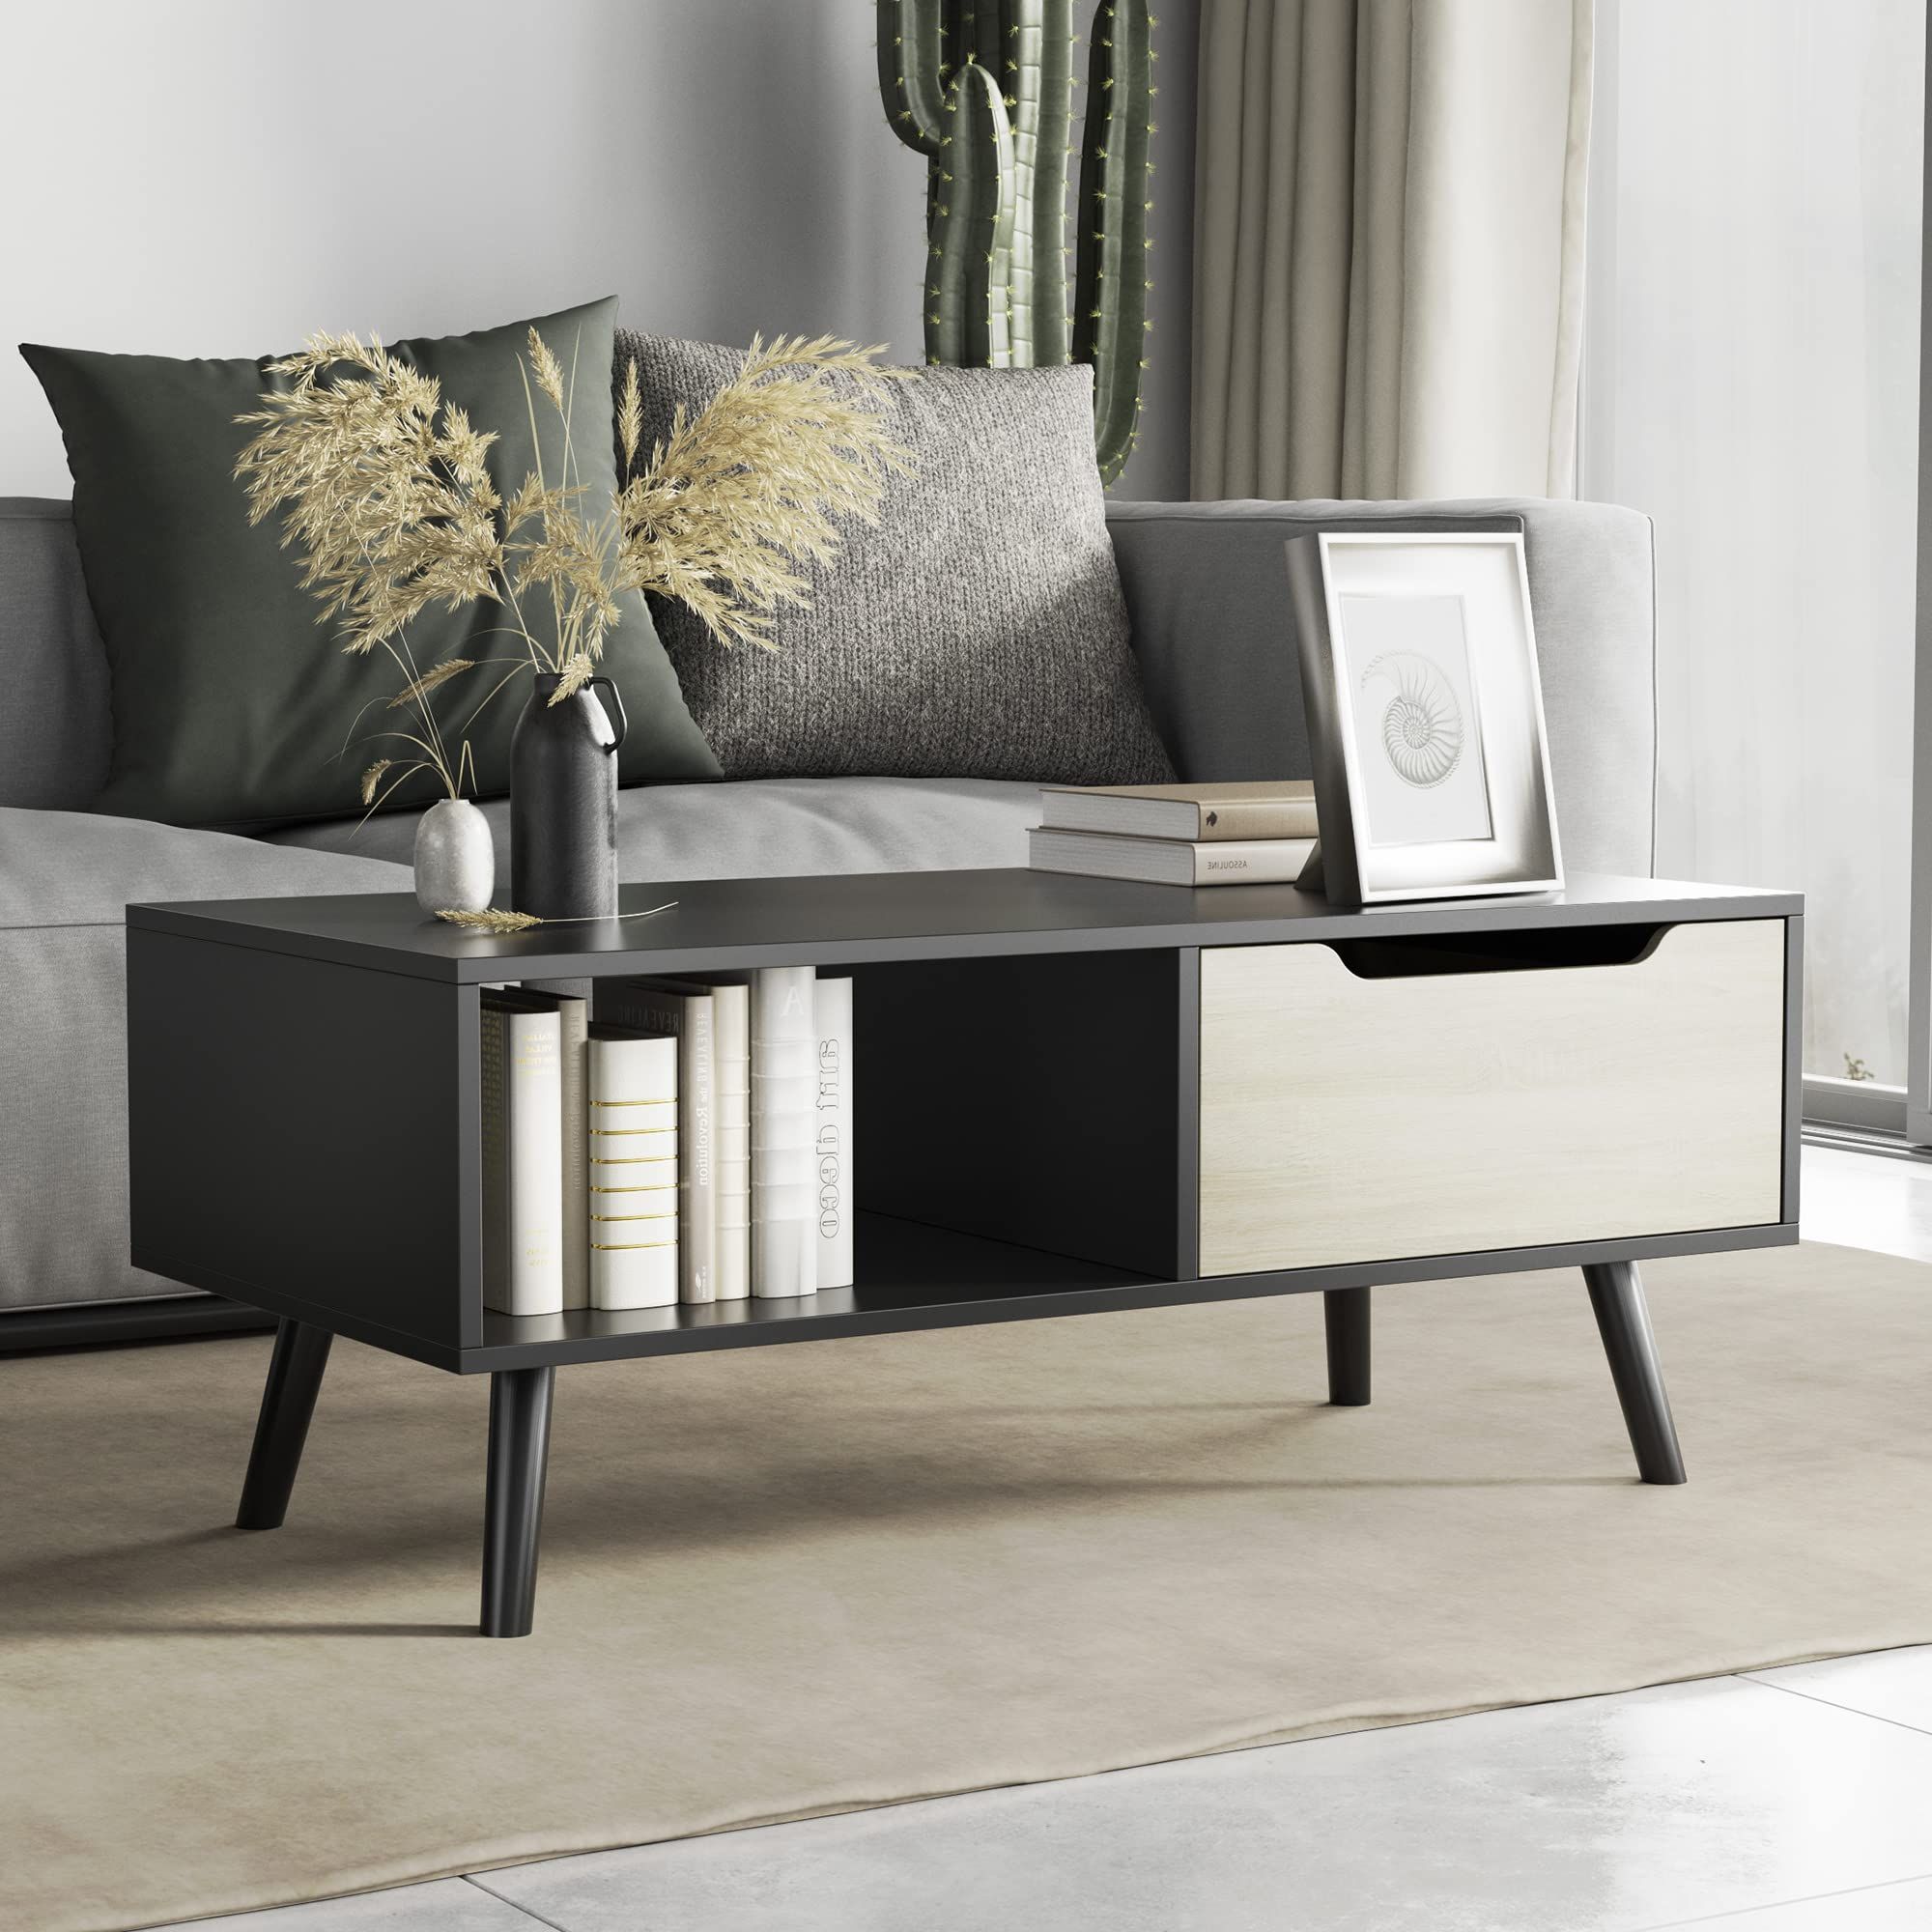 Recent Cozy Castle Boho Living Room Tables Pertaining To Amazon: Cozy Castle Modern Coffee Table, Wooden Cocktail Table With  Storage, Minimalist Hallway Table, Mid Century Modern Coffee Table For Living  Room Apartment Reception, Black : Home & Kitchen (Photo 5 of 10)